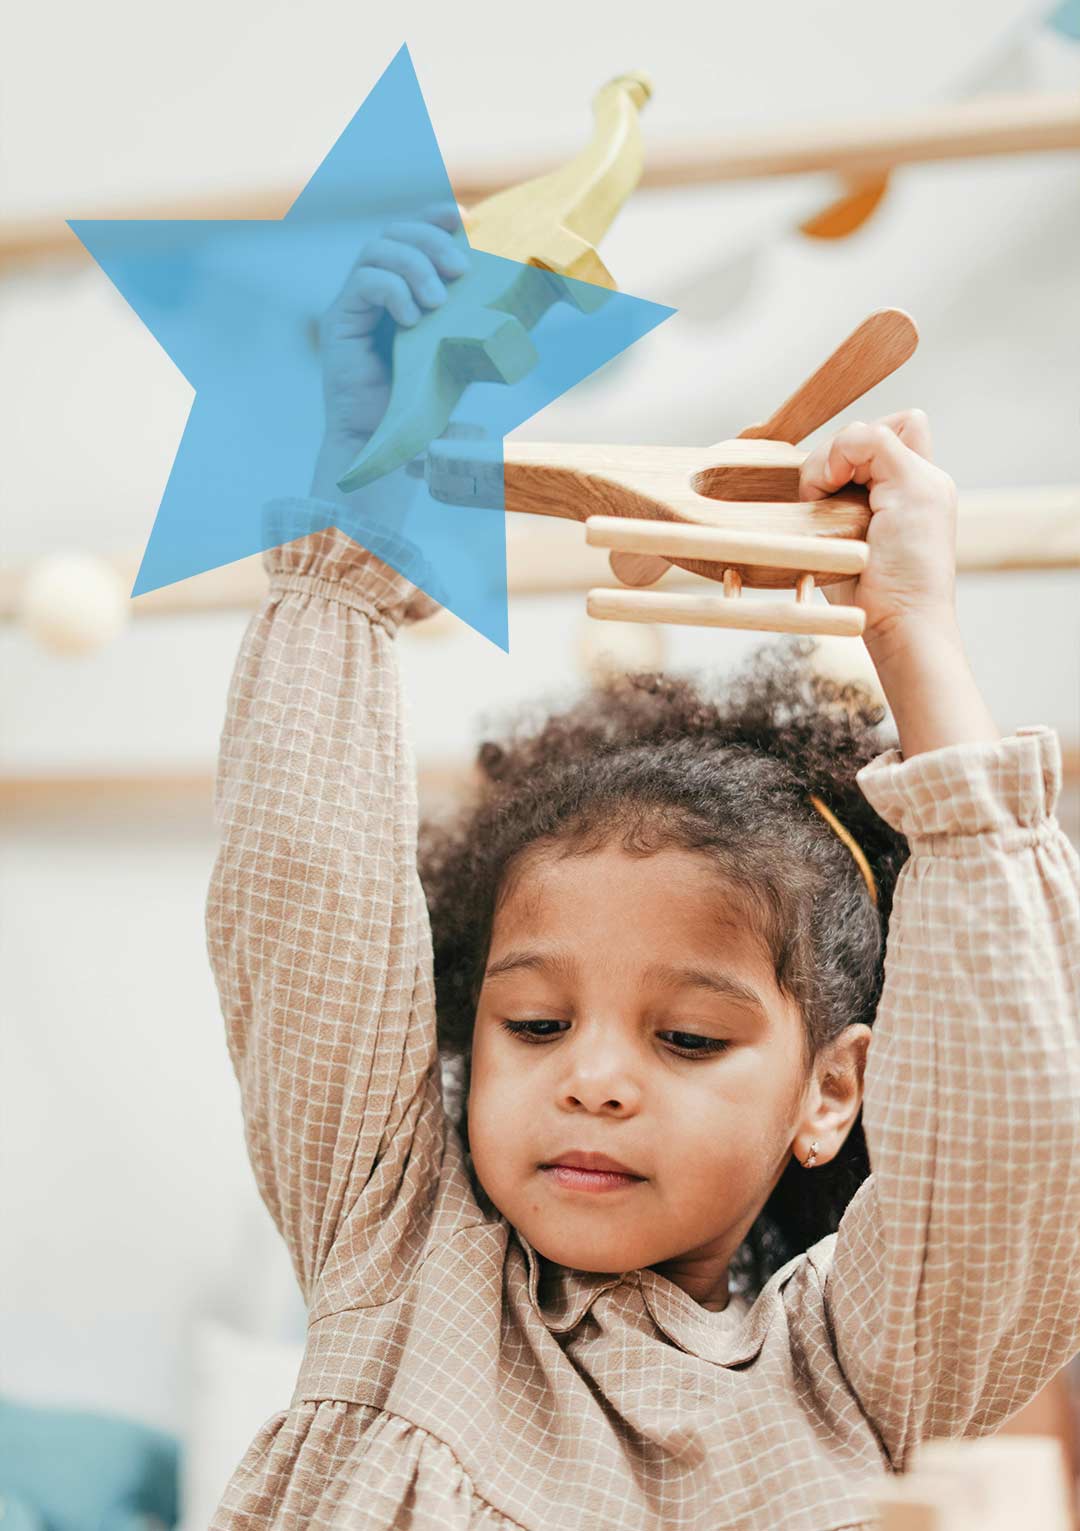 Young child playing with wooden toys with a blue star overlain the top left corner.